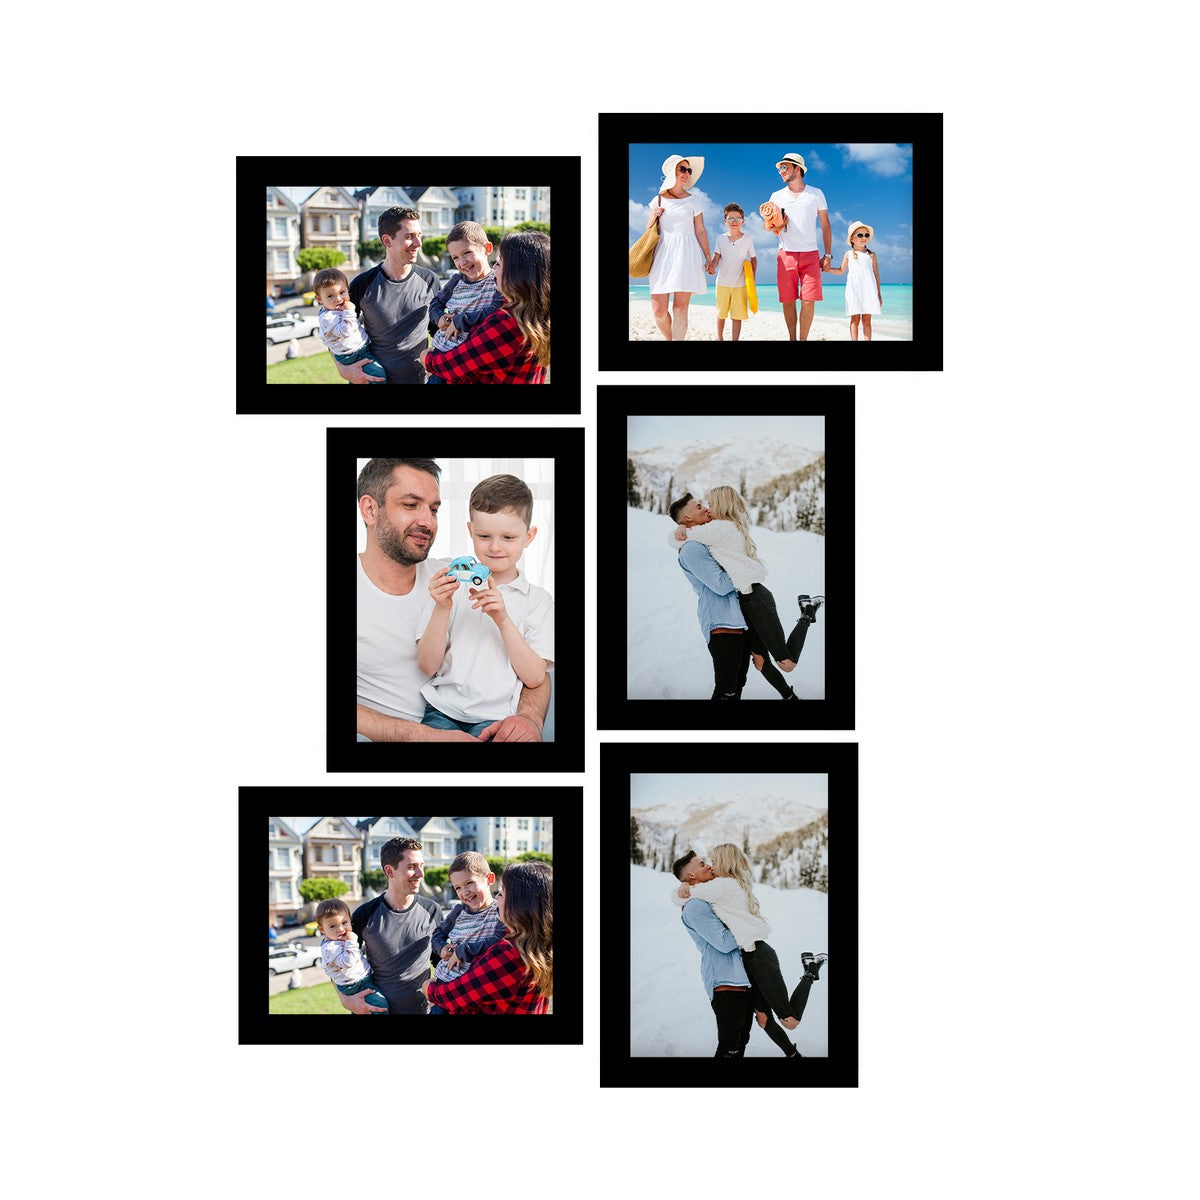 Memory Wall Collage Photo Frame - Set of 6 Photo Frames for 6 Photos of 6"x8"